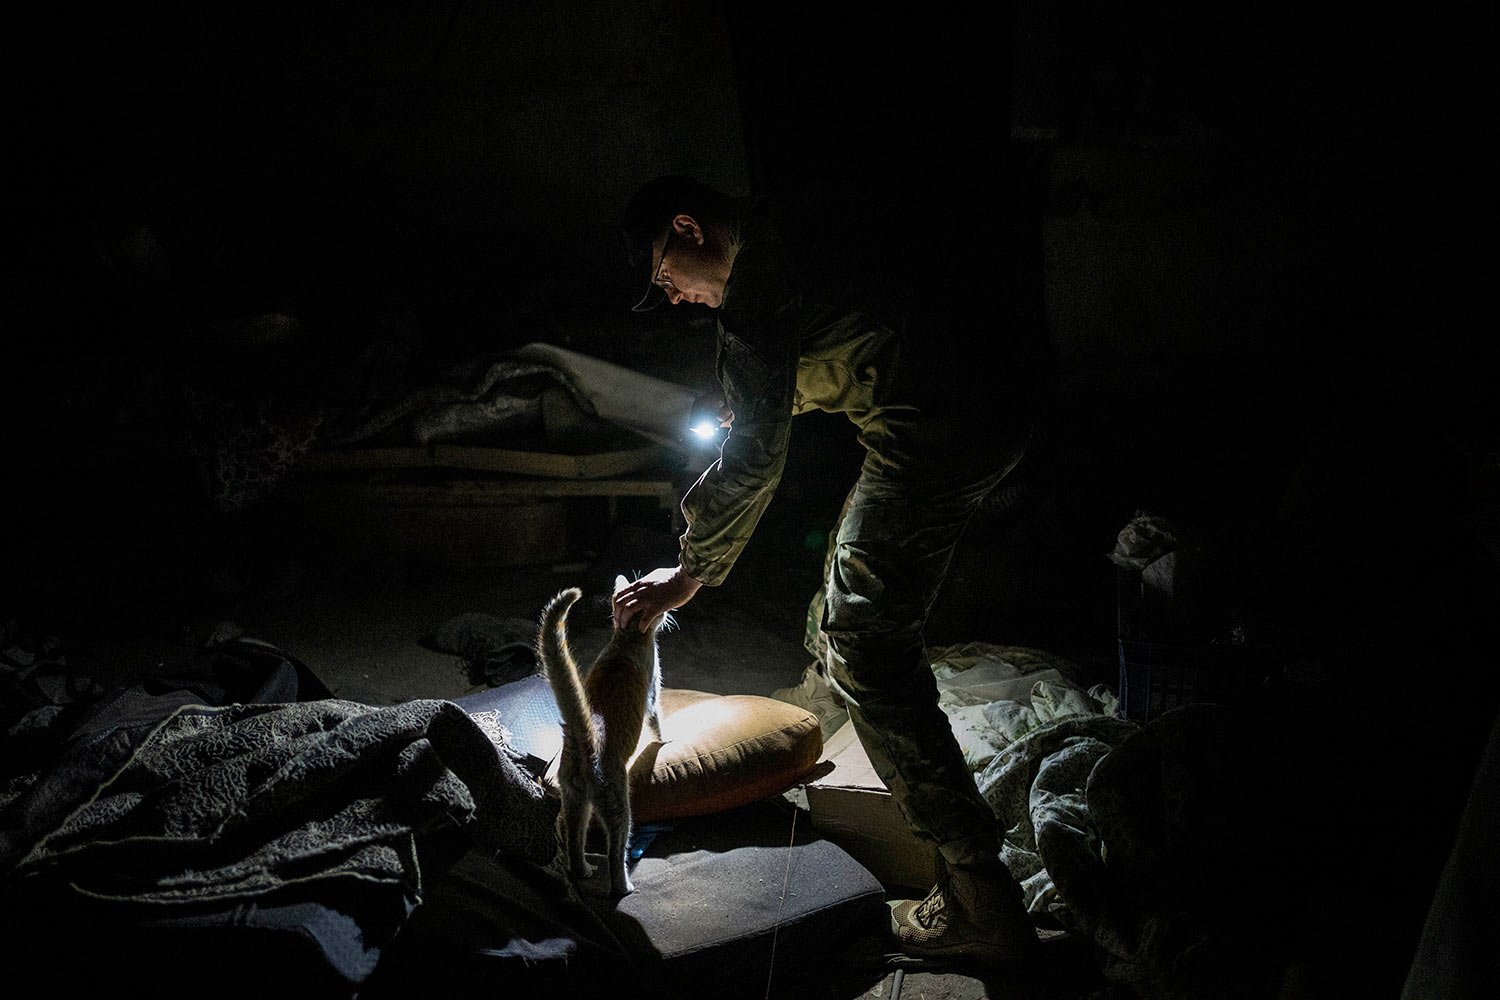  Ukrainian serviceman Anton pets a cat in a basement previously used by Russian soldiers as a temporary base in the village of Malaya Rohan, Kharkiv region, east Ukraine, Monday, May 16, 2022. (AP Photo/Bernat Armangue) 